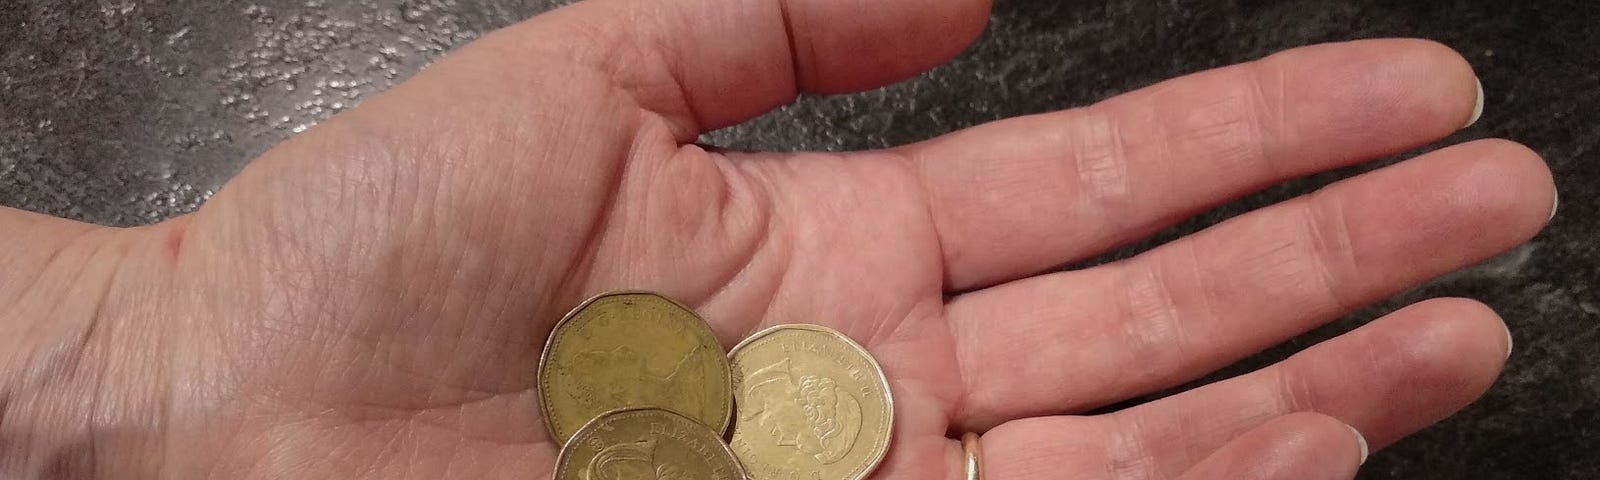 Three Canadian dollar coins resting in the palm of an adult’s hand